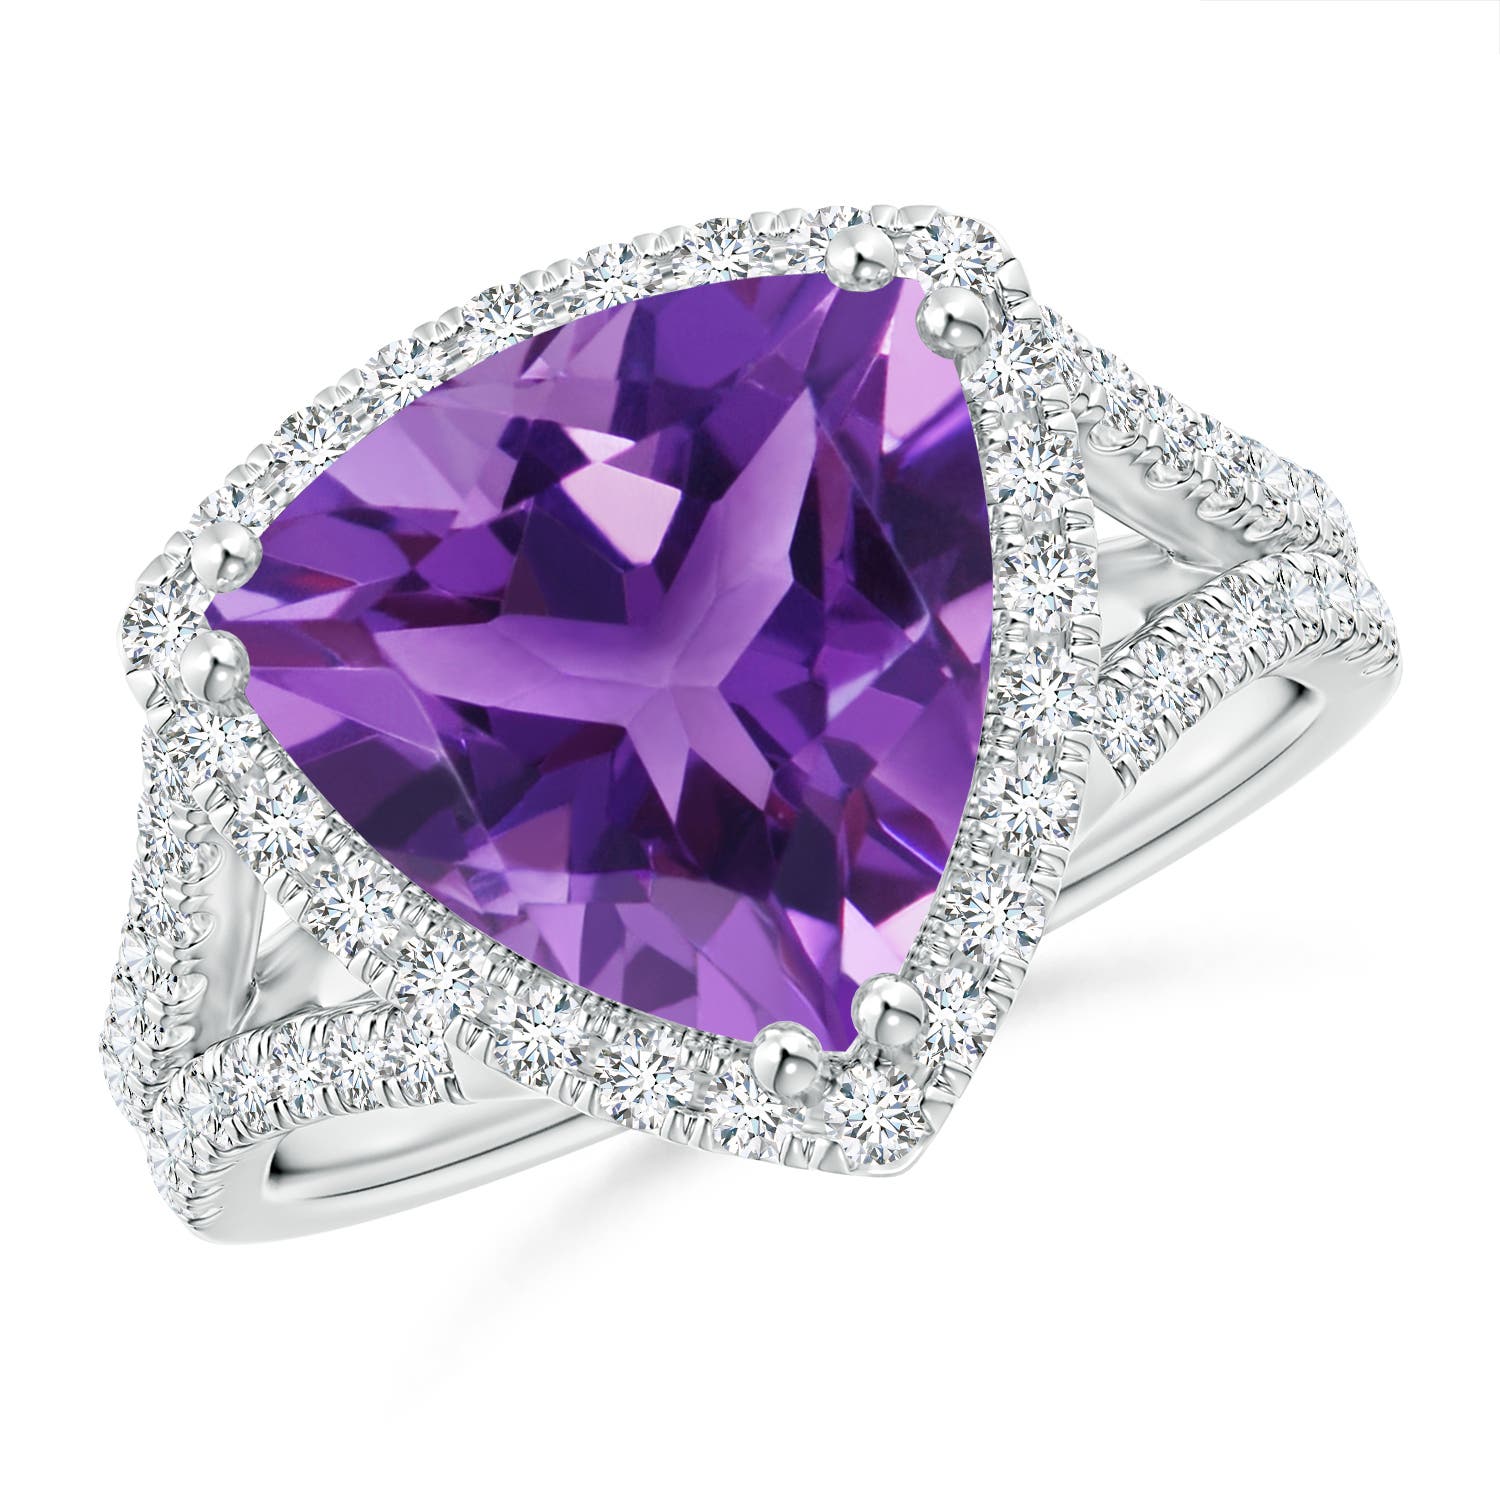 AAA - Amethyst / 4.47 CT / 14 KT White Gold